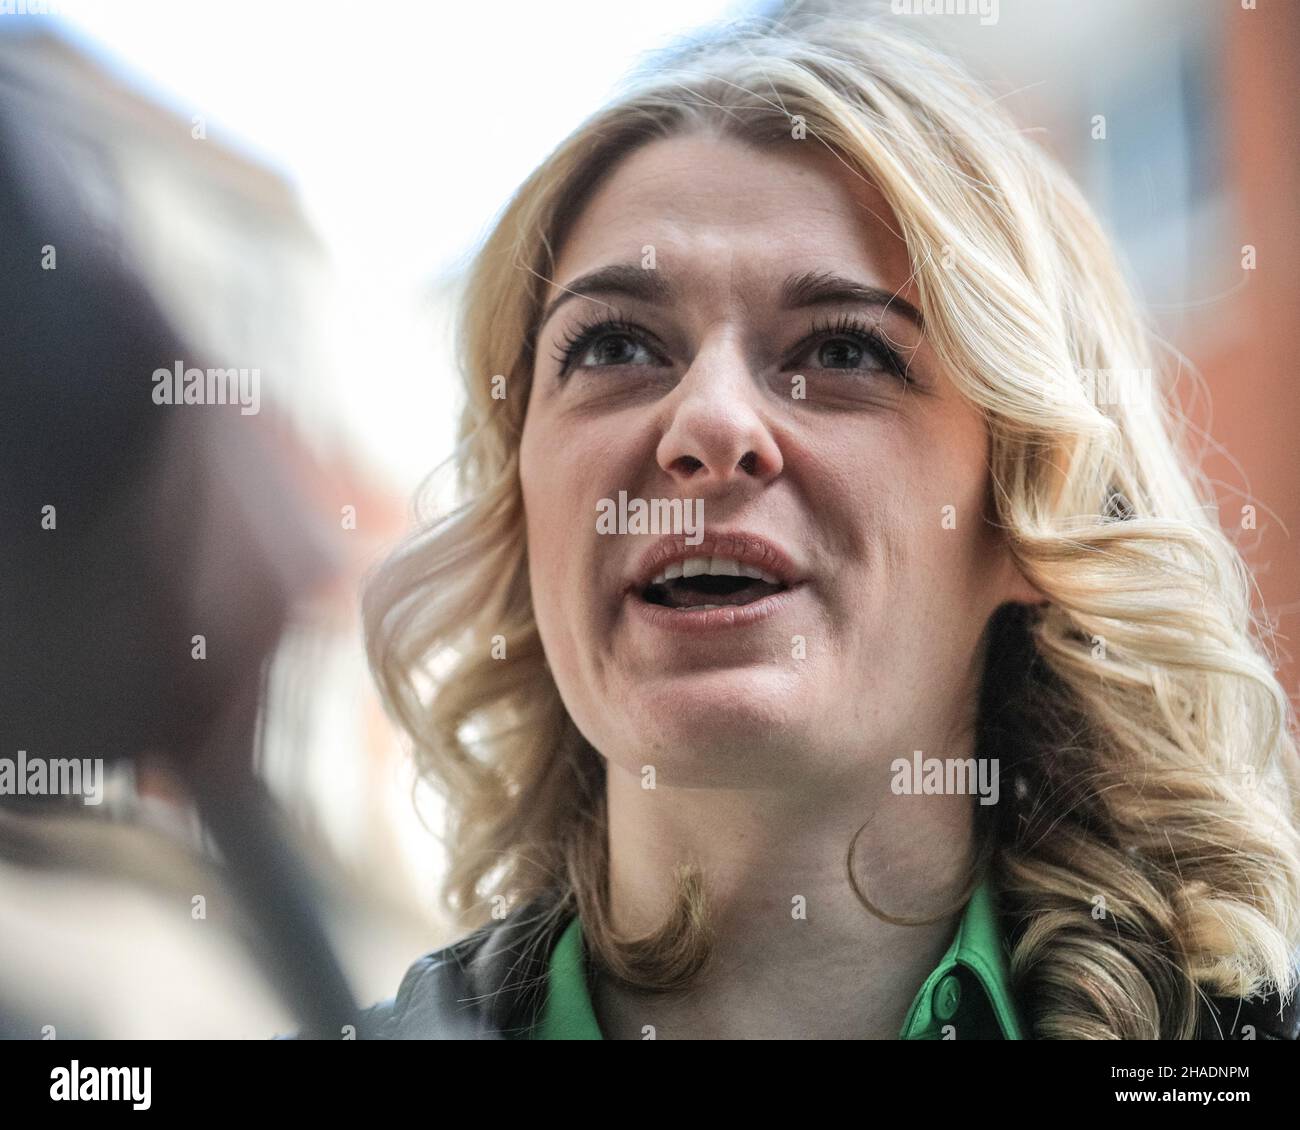 London, UK. 12th Dec, 2021. Dehenna Davison, MP, Conservative Party politician, MP for Bishop Aukland since 2019 exits the BBC headquarters in London today following an appearance at the Andrew Marr Show. Davison also co-hosts a Sunday morning broadcast show on GB News. Credit: Imageplotter/Alamy Live News Stock Photo